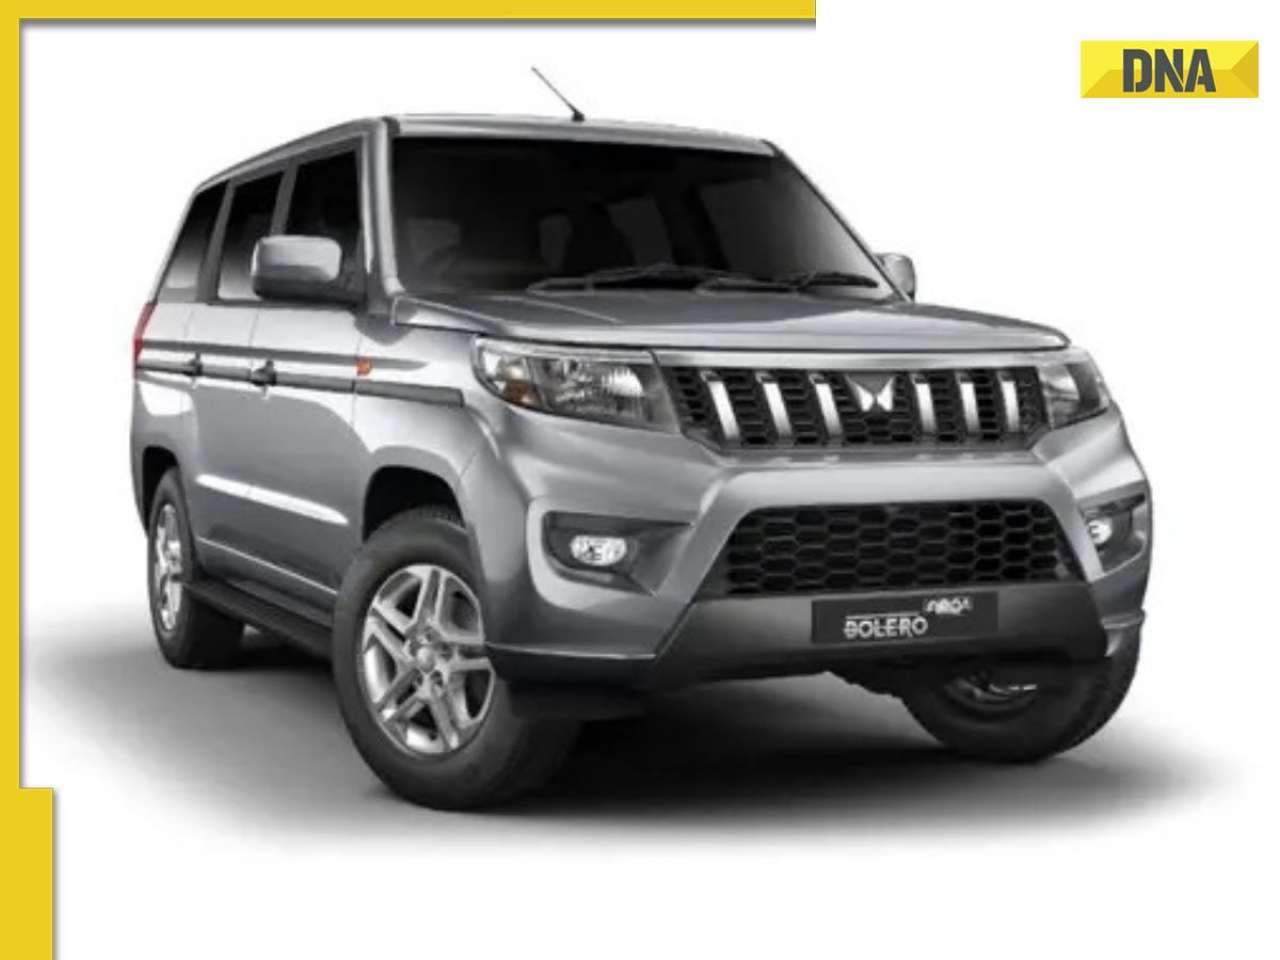 Mahindra launches new 9-seater SUV in India, price starts at just Rs...